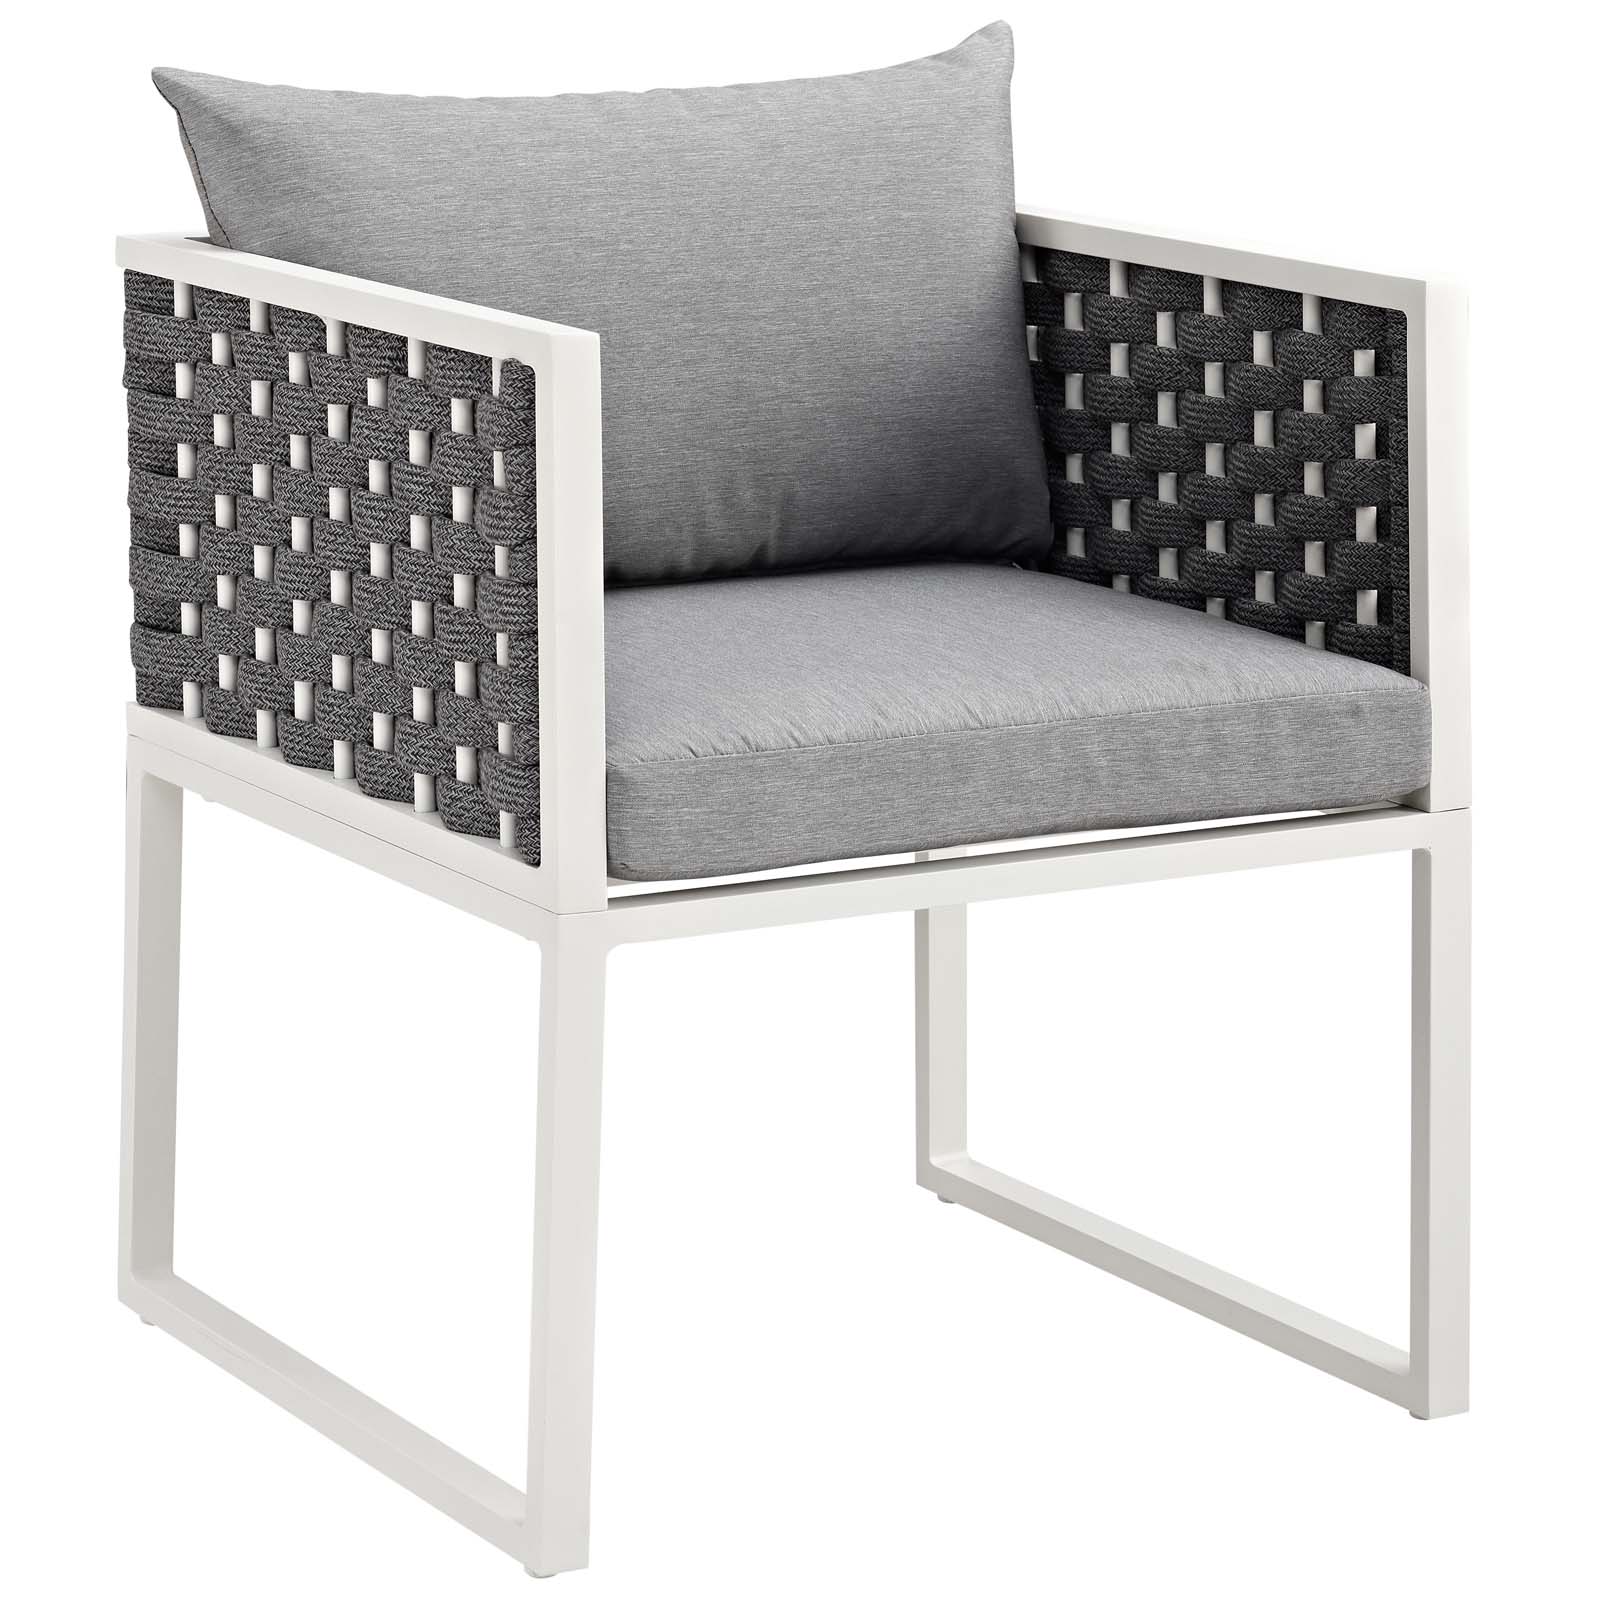 Modern Contemporary Urban Outdoor Patio Balcony Garden Furniture Side Dining Chair Armchair, Set of Two, Fabric Aluminium, White Grey Gray - image 5 of 6